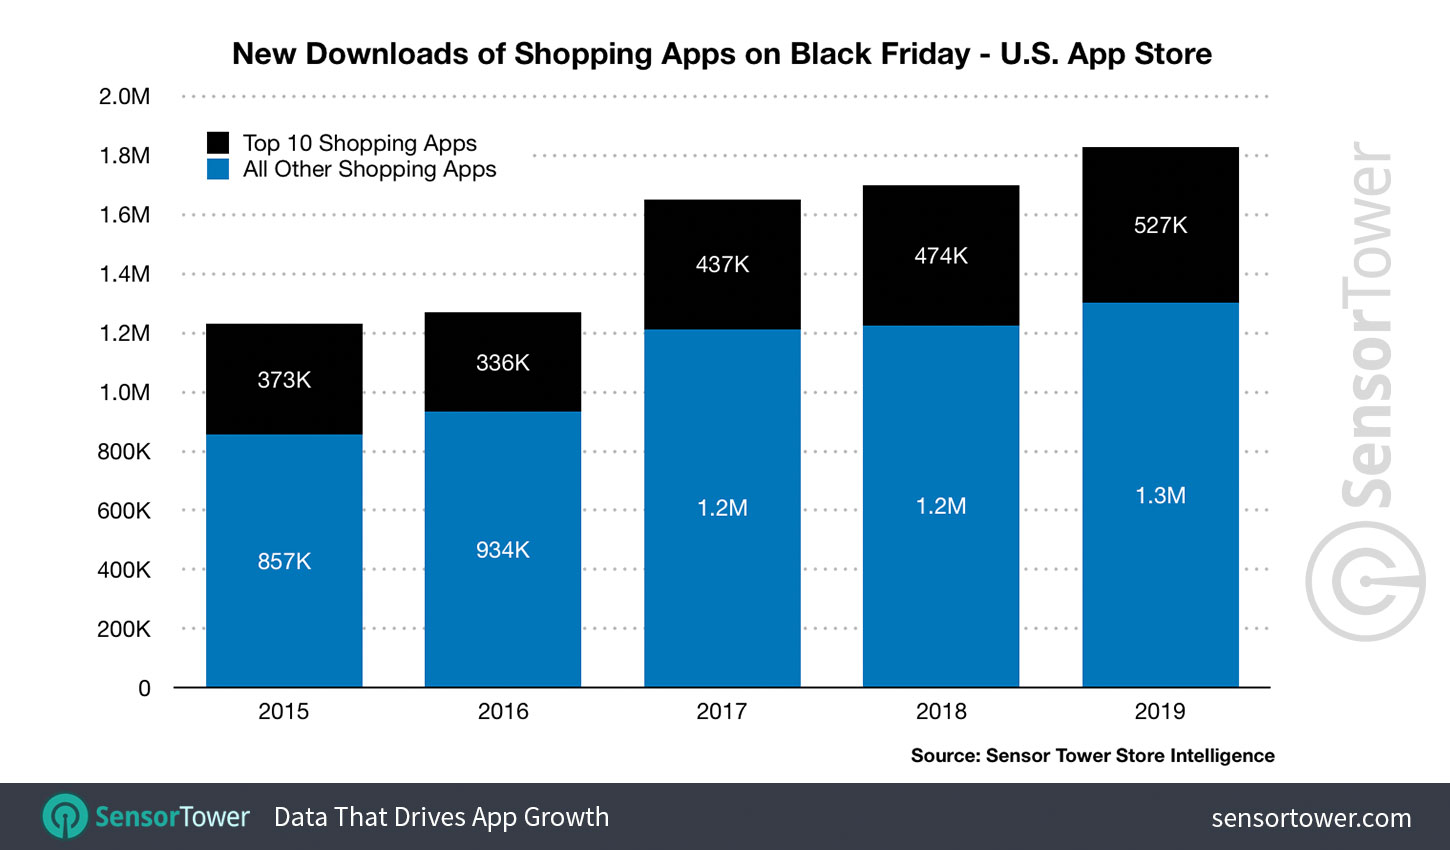 New Downloads of Shopping Apps on Black Friday—U.S. App Store